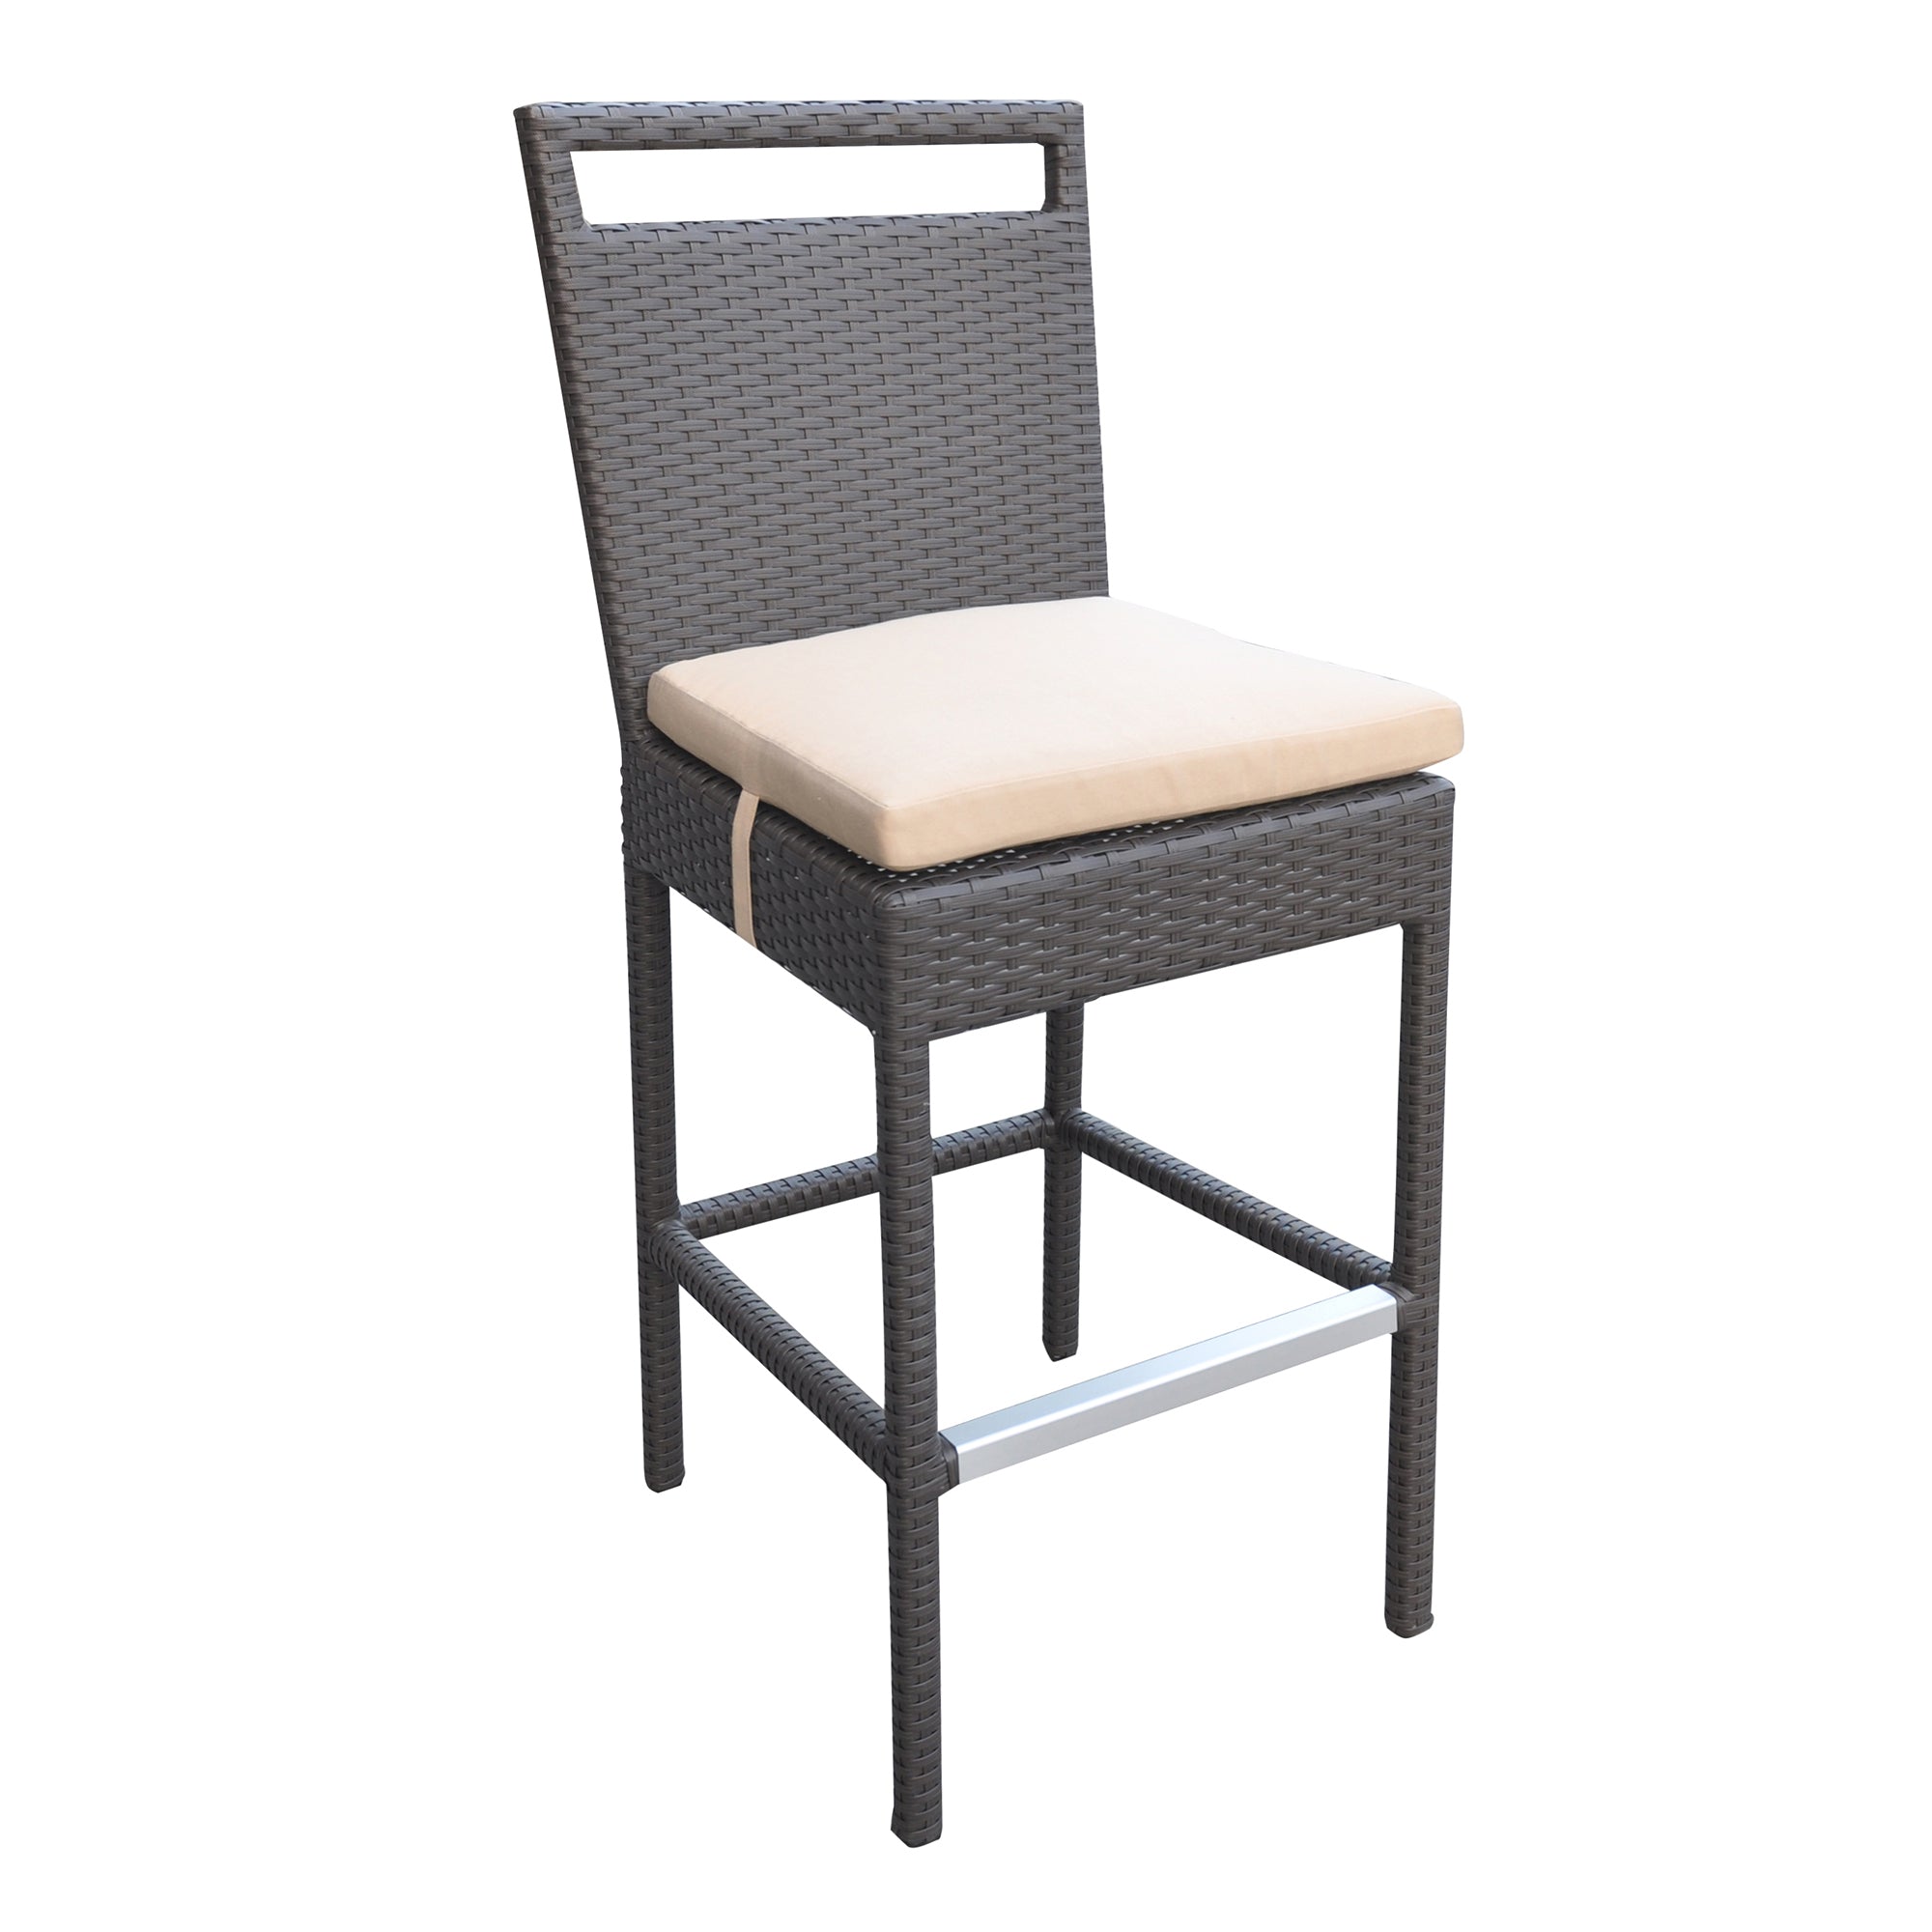 Armen Living Lctrbabe Tropez Outdoor Patio Wicker Barstool With Water Resistant Beige Fabric Cushions